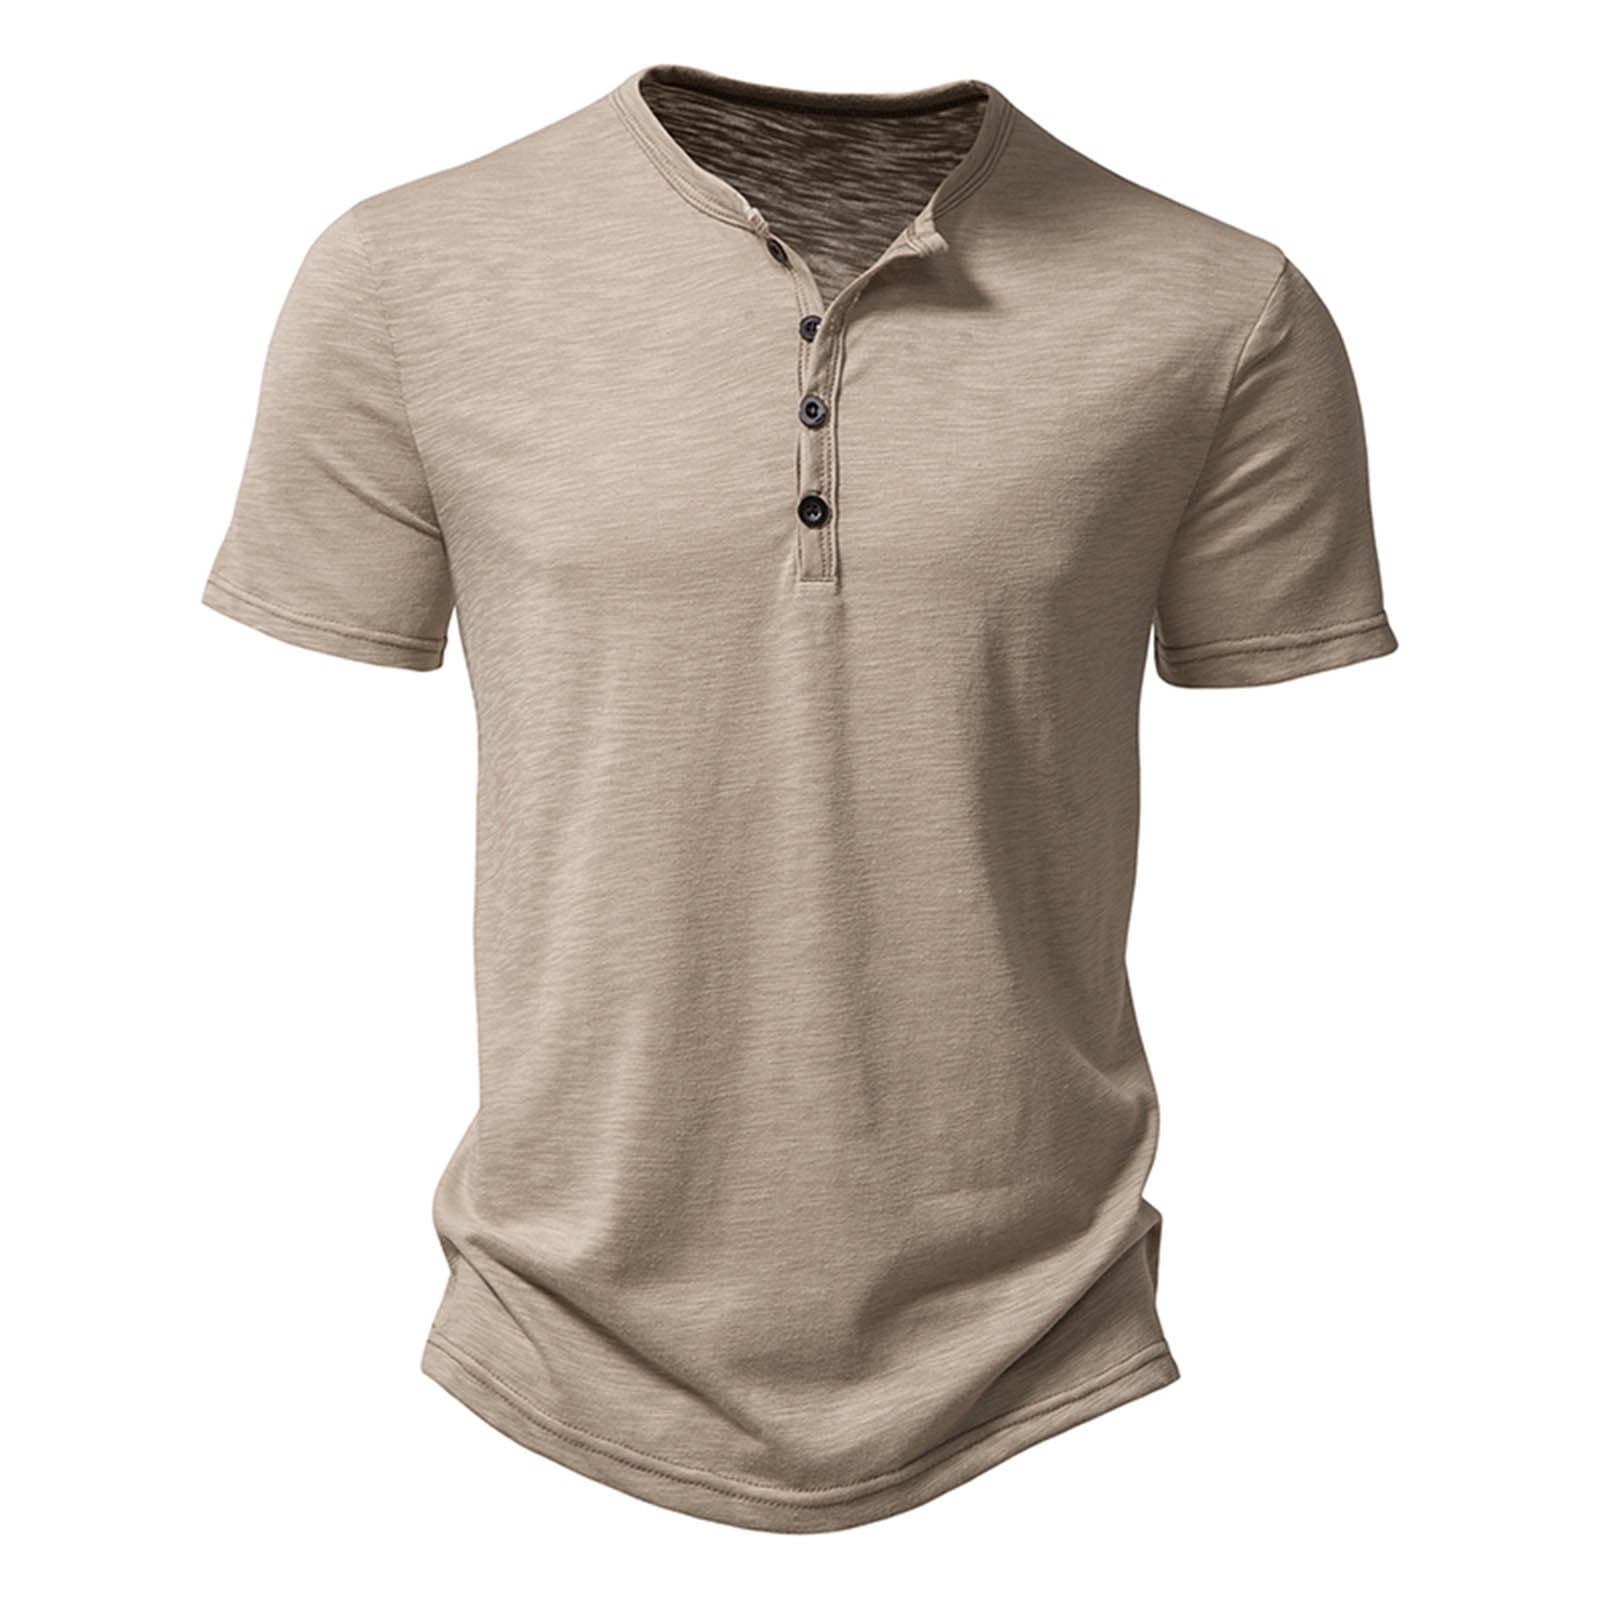 YYDGH Henley Shirts for Men Slim Fit Short Sleeve Basic T-Shirts Summer  Solid Color Casual Tee Brown M